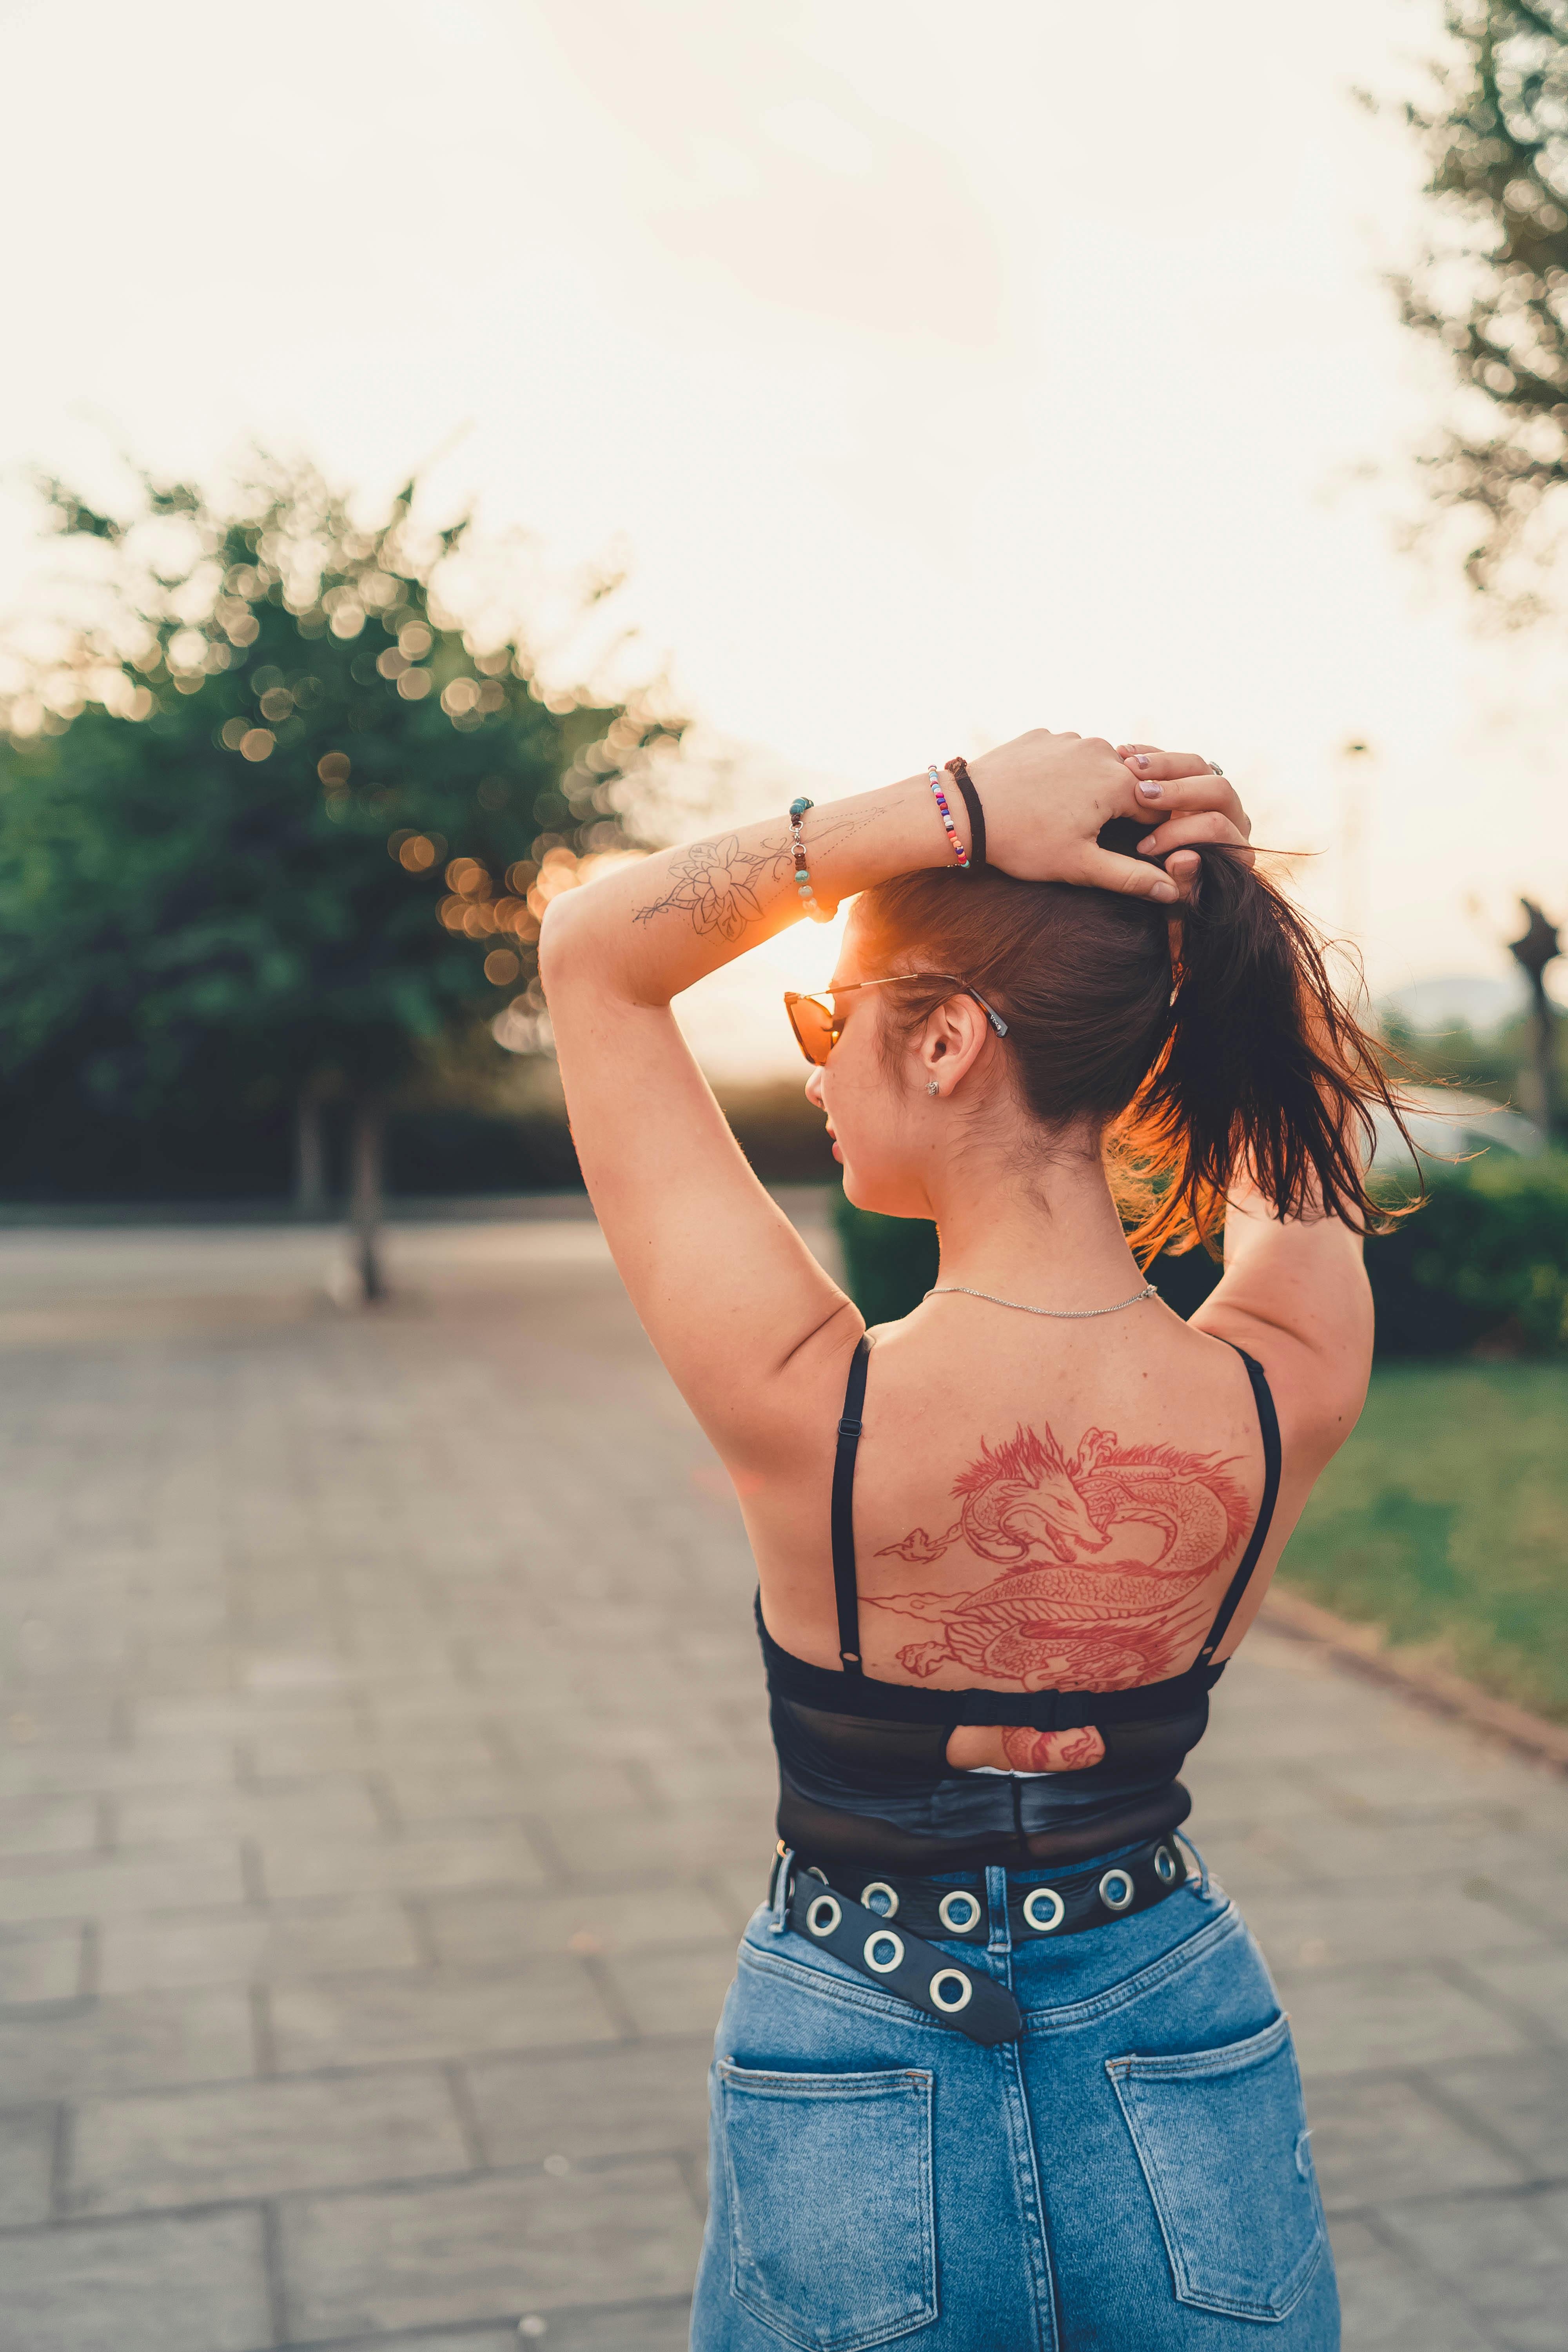 Backside of a Woman with Full Back Tattoos · Free Stock Photo